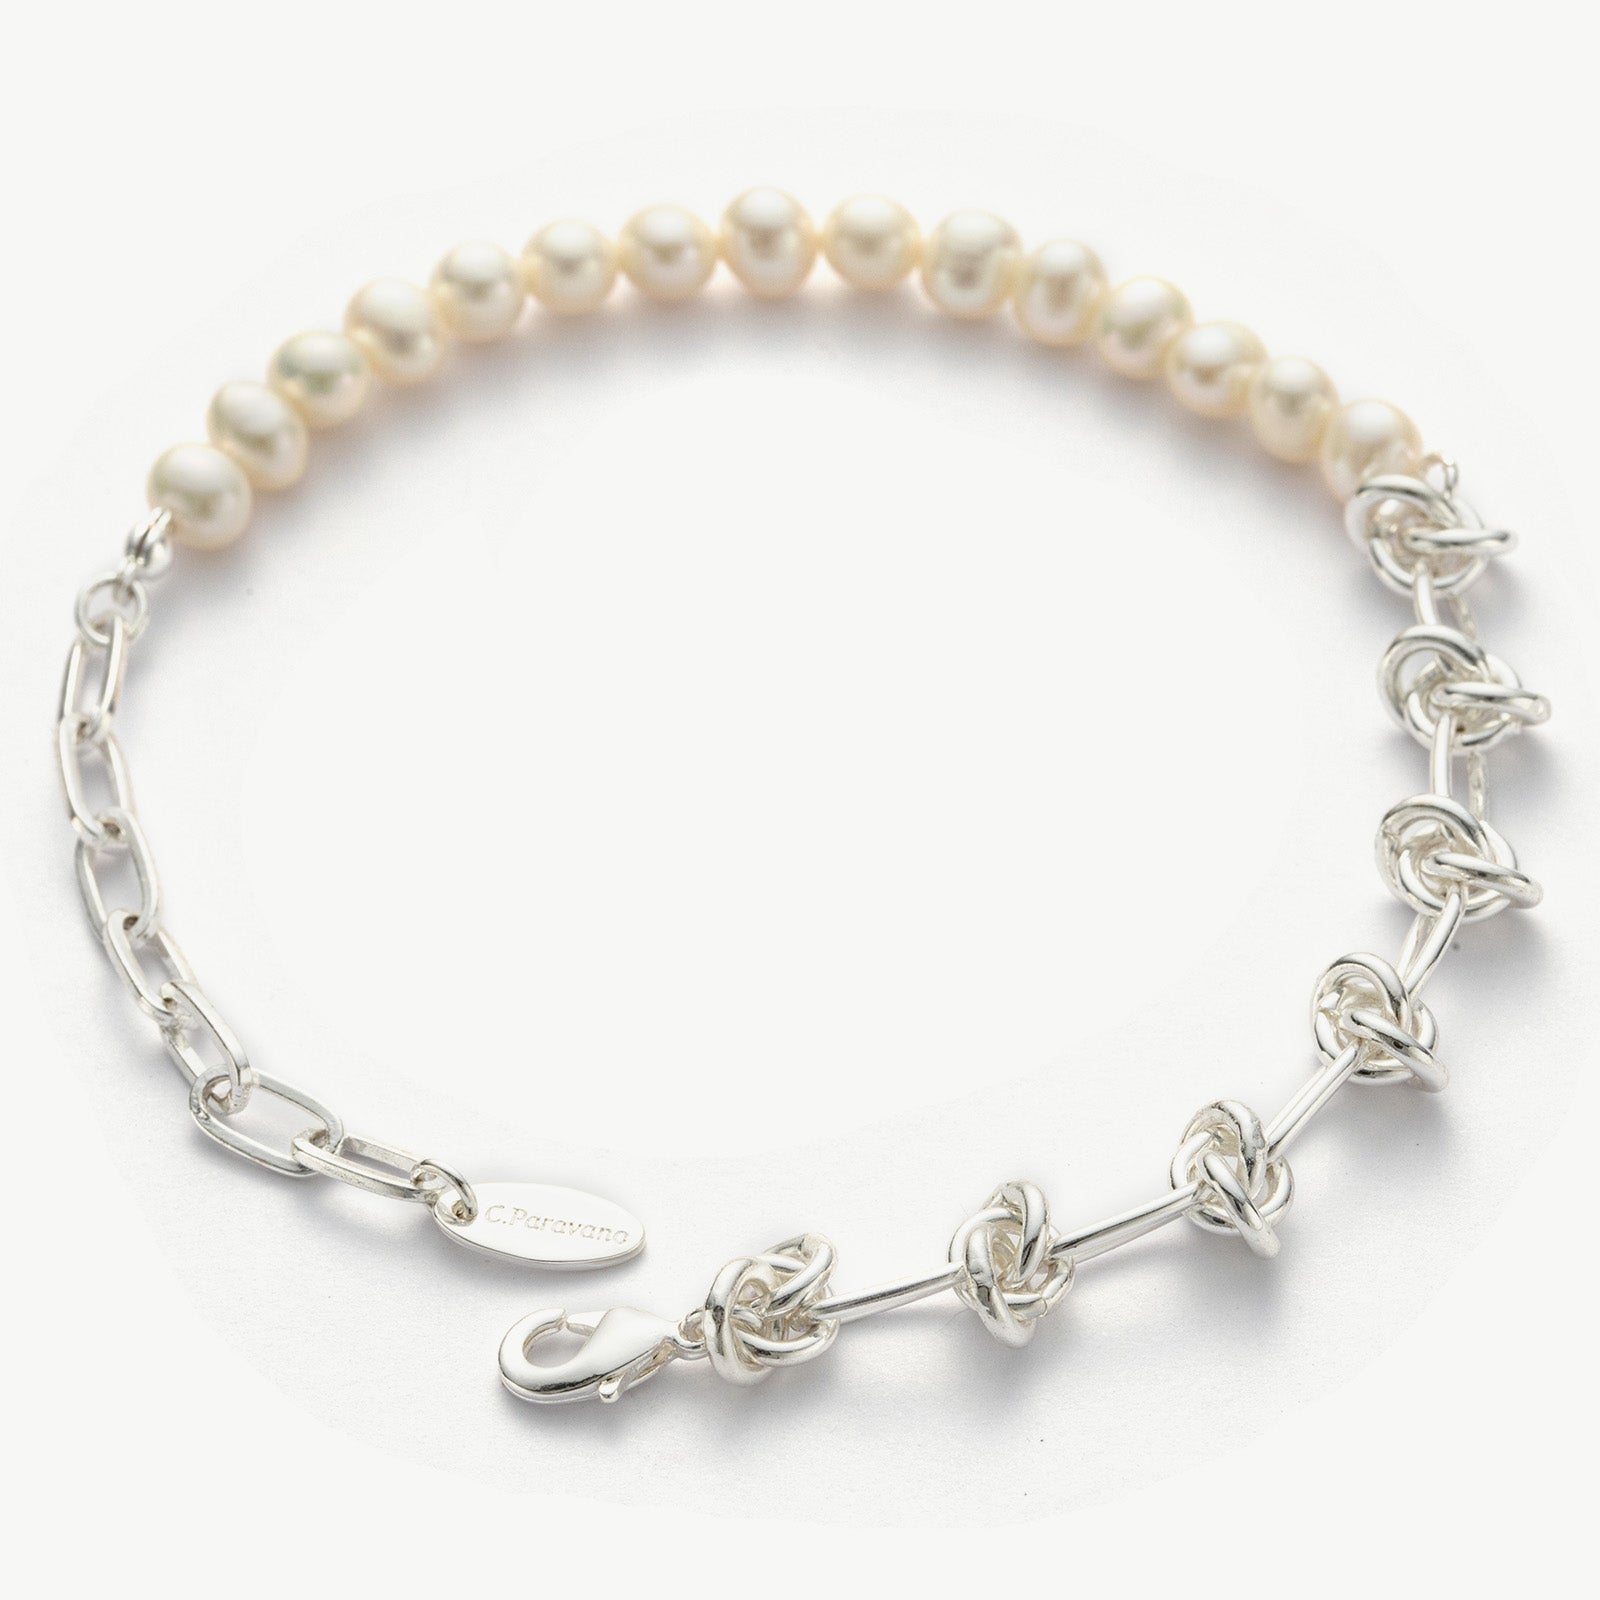 Molten Baroque Pearl Twisted Chain Bracelet featuring a twisted chain design in platinum, this bracelet radiates with the lustrous glow of baroque pearls, adding a touch of radiant beauty to your wrist